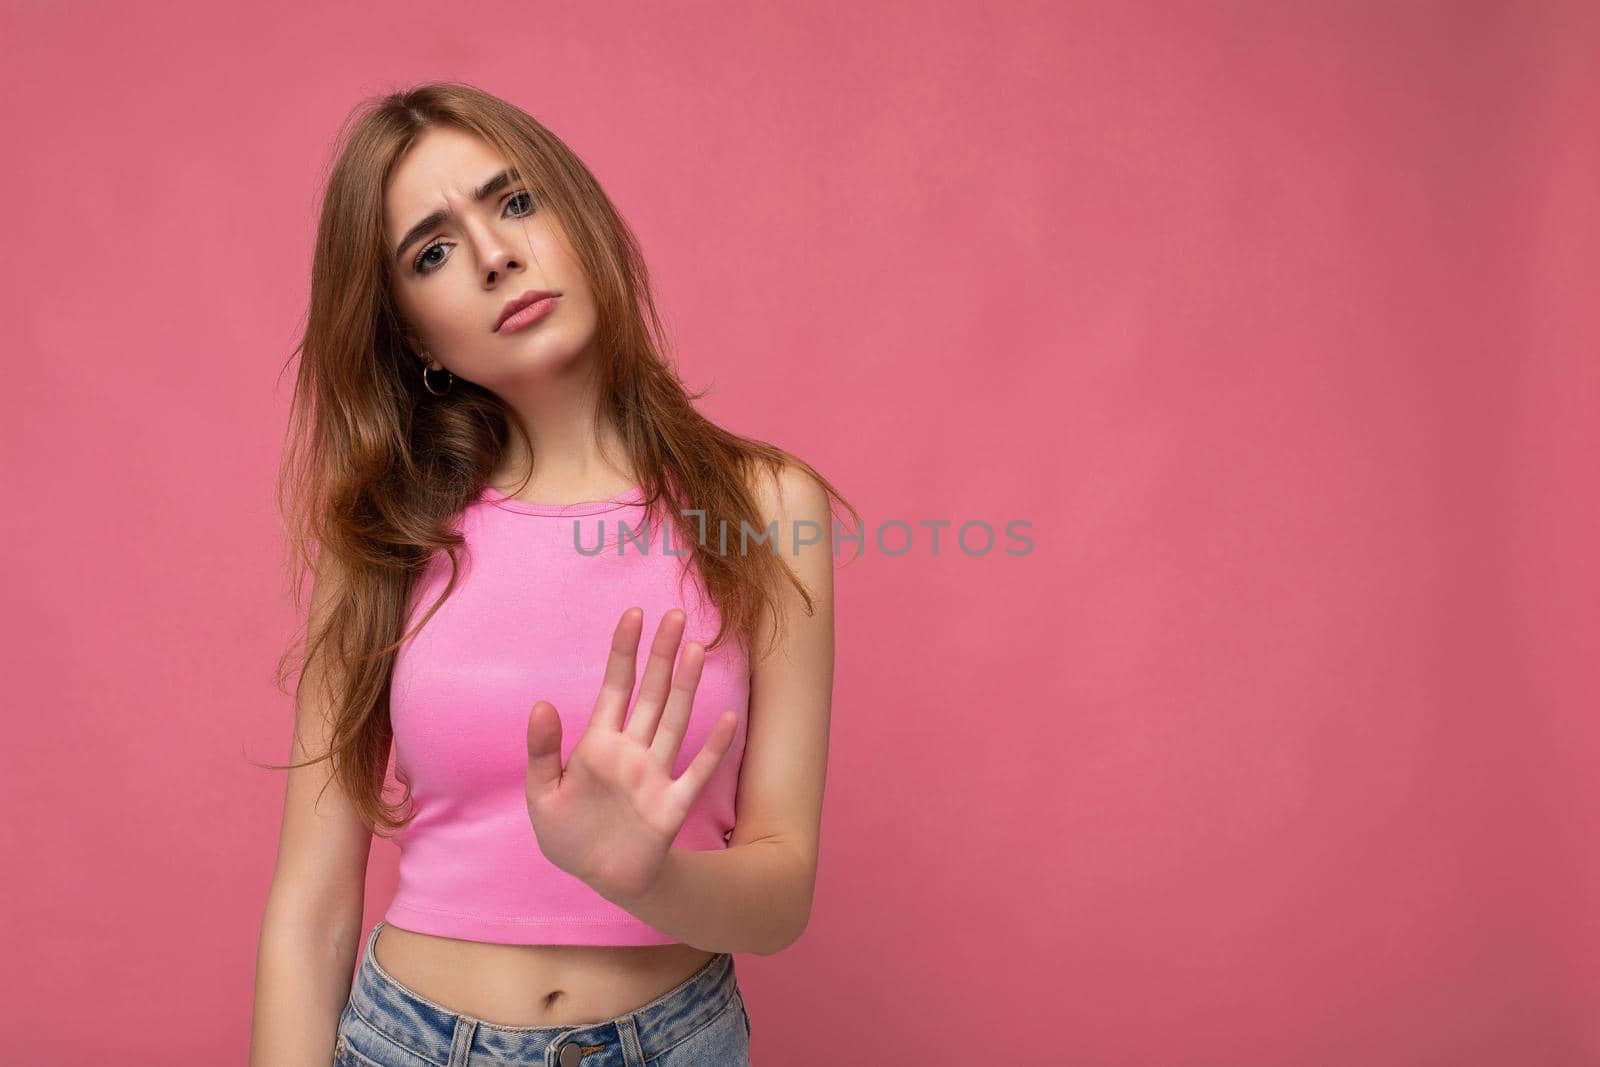 Serious upset young attractive dark blonde woman with sincere emotions isolated on background wall with copy space wearing stylish pink top and doing stop gesture. Negative concept.